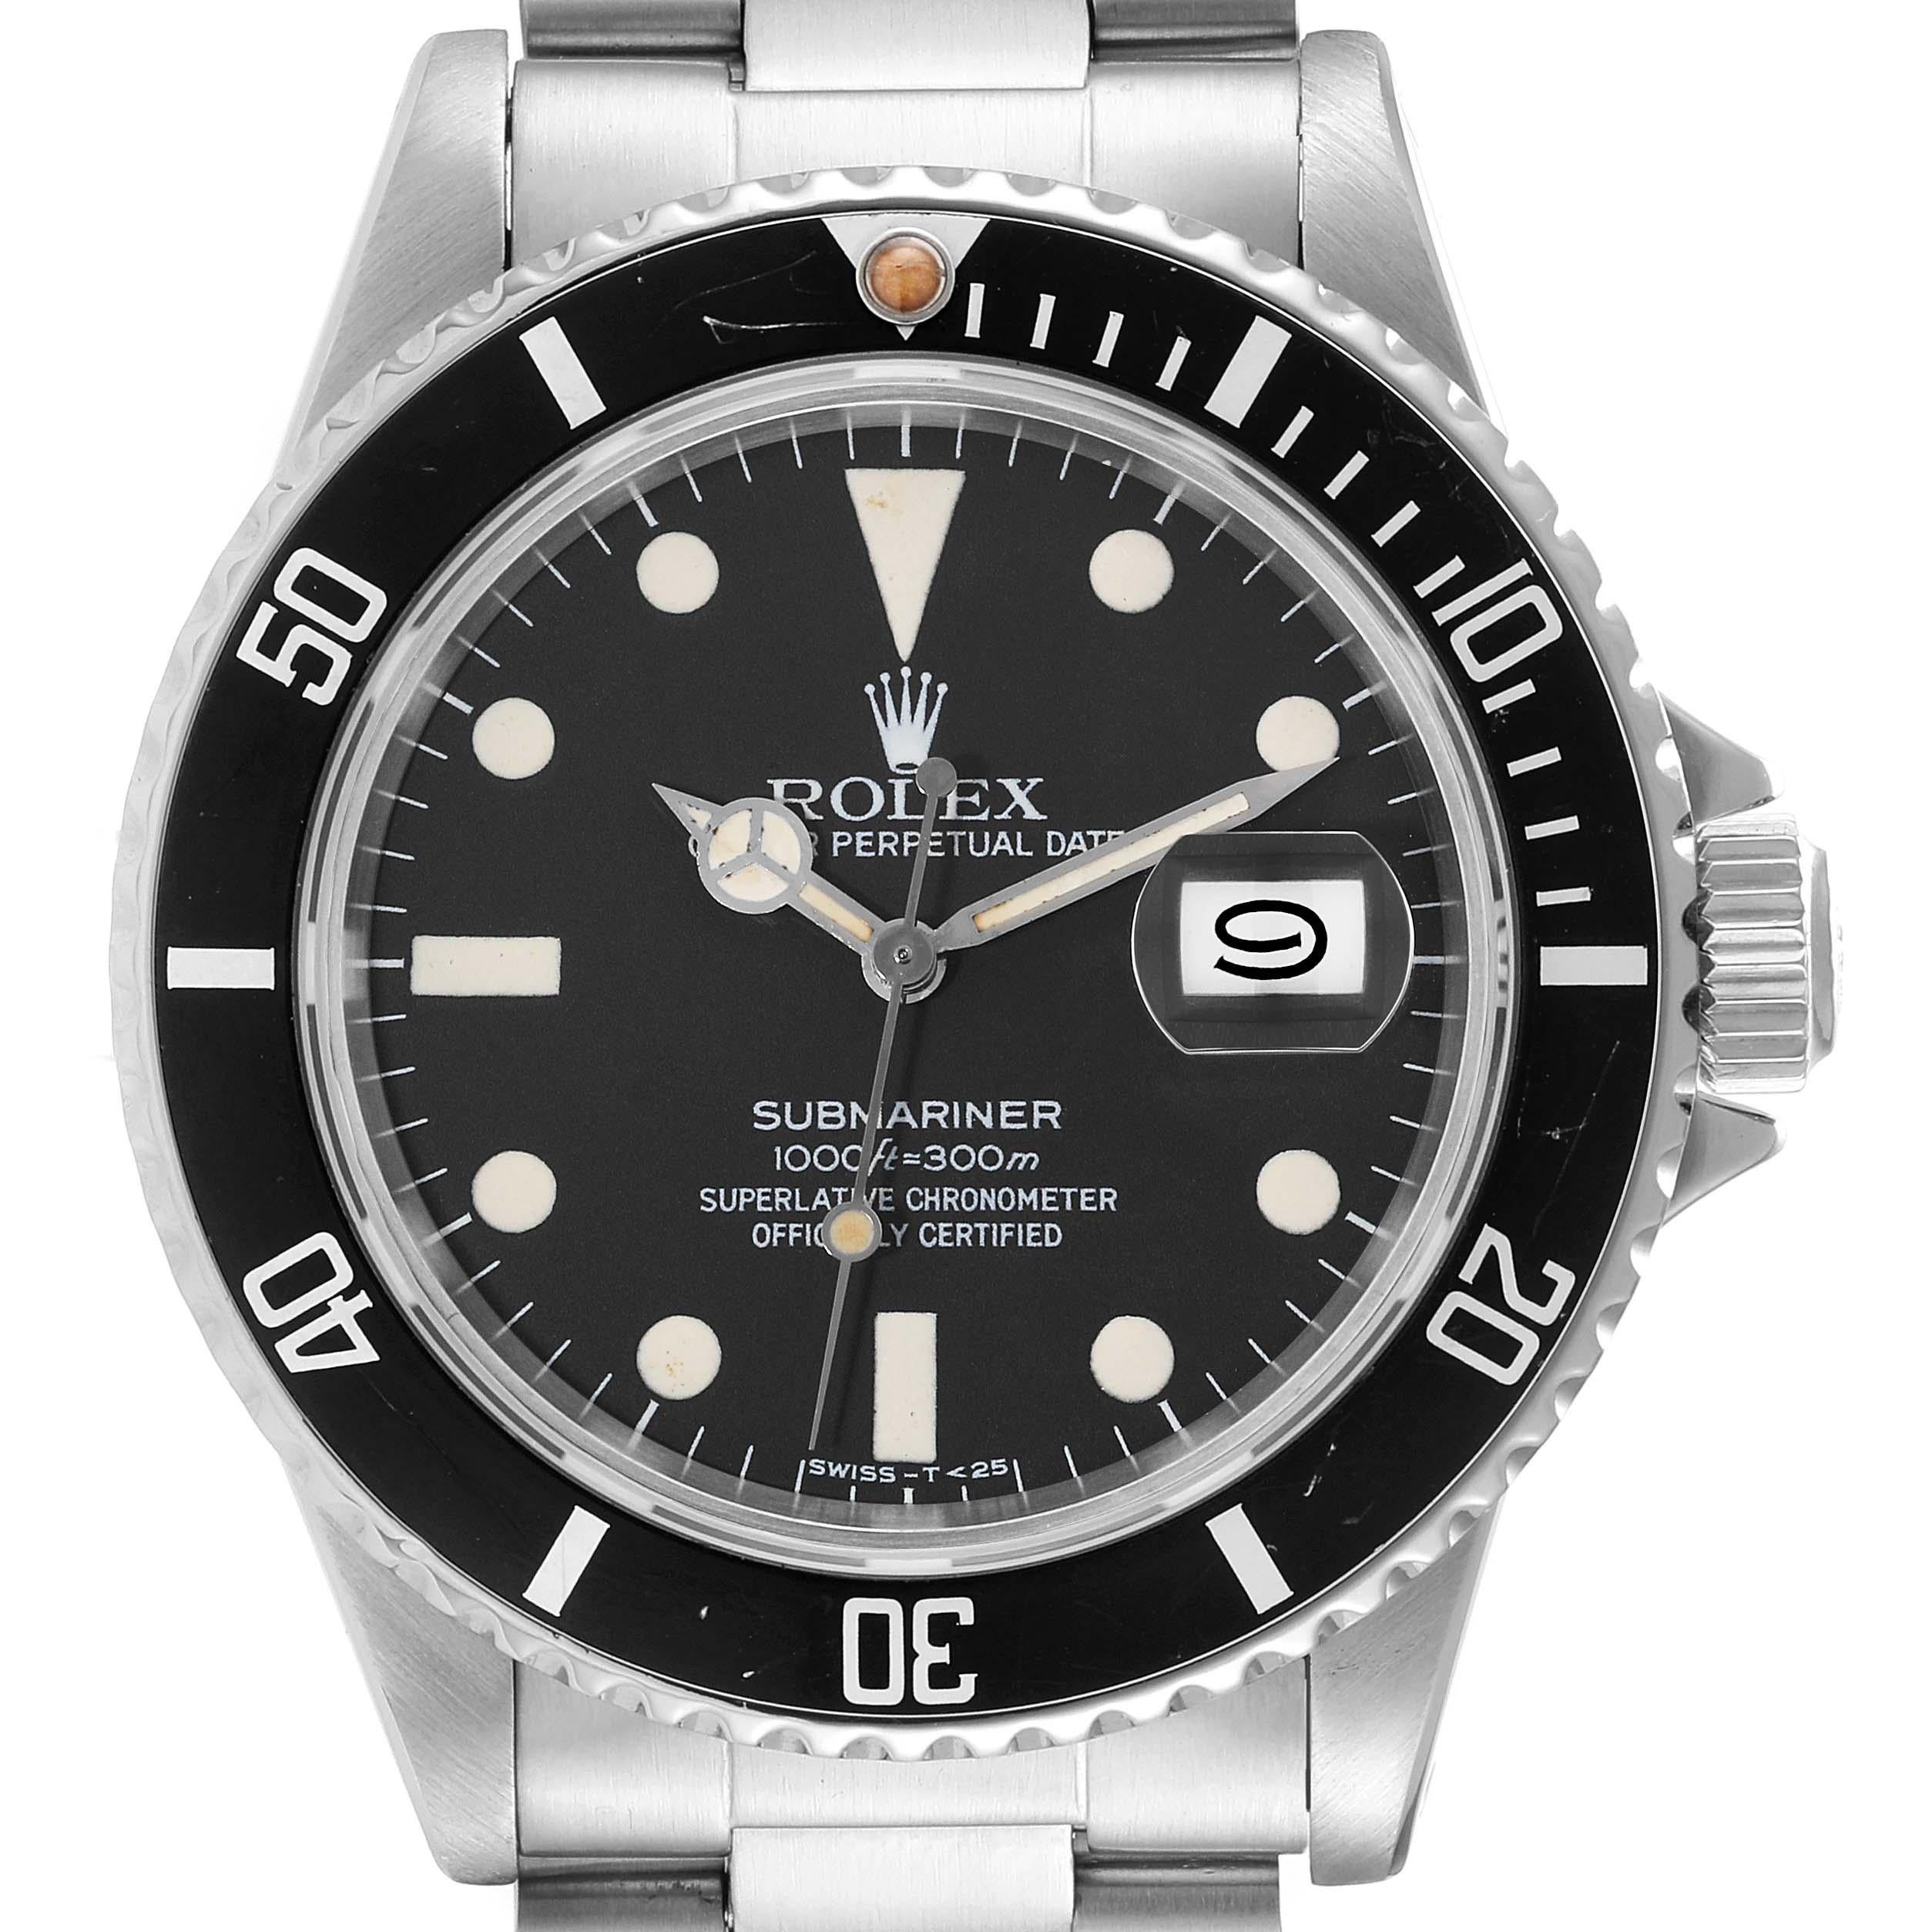 Rolex Submariner Date Steel Vintage Mens Watch 16800 Box Papers. Officially certified chronometer automatic self-winding movement. Stainless steel case 40 mm in diameter. Stainless steel unidirectional rotating bezel with black insert diver's